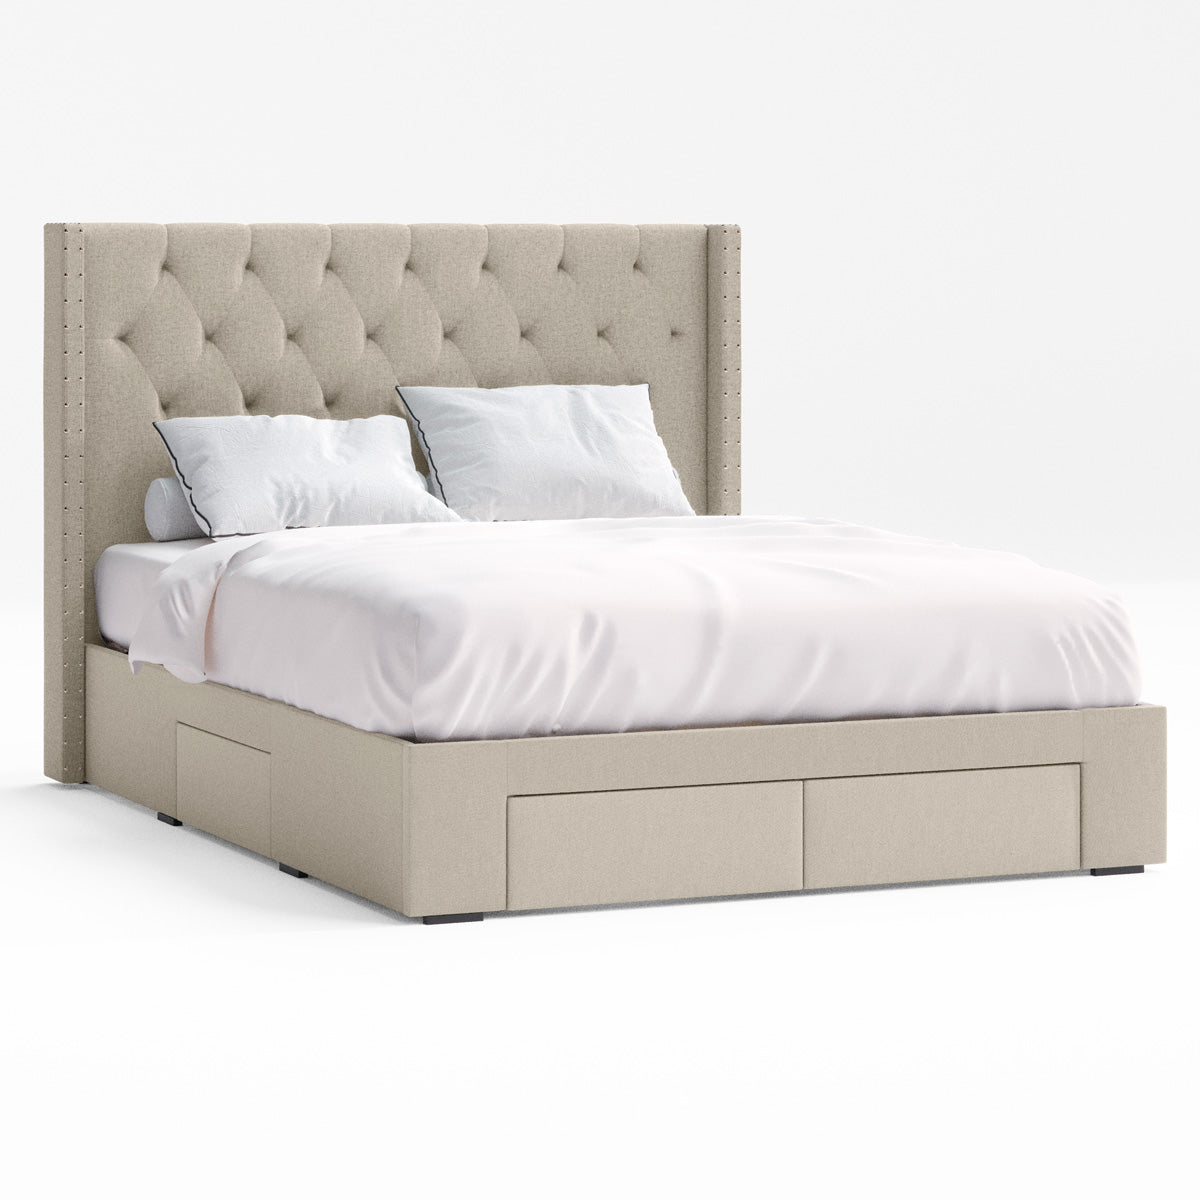 Leonora Wing Bed Frame with Four Storage Drawers (Natural Beige Fabric)